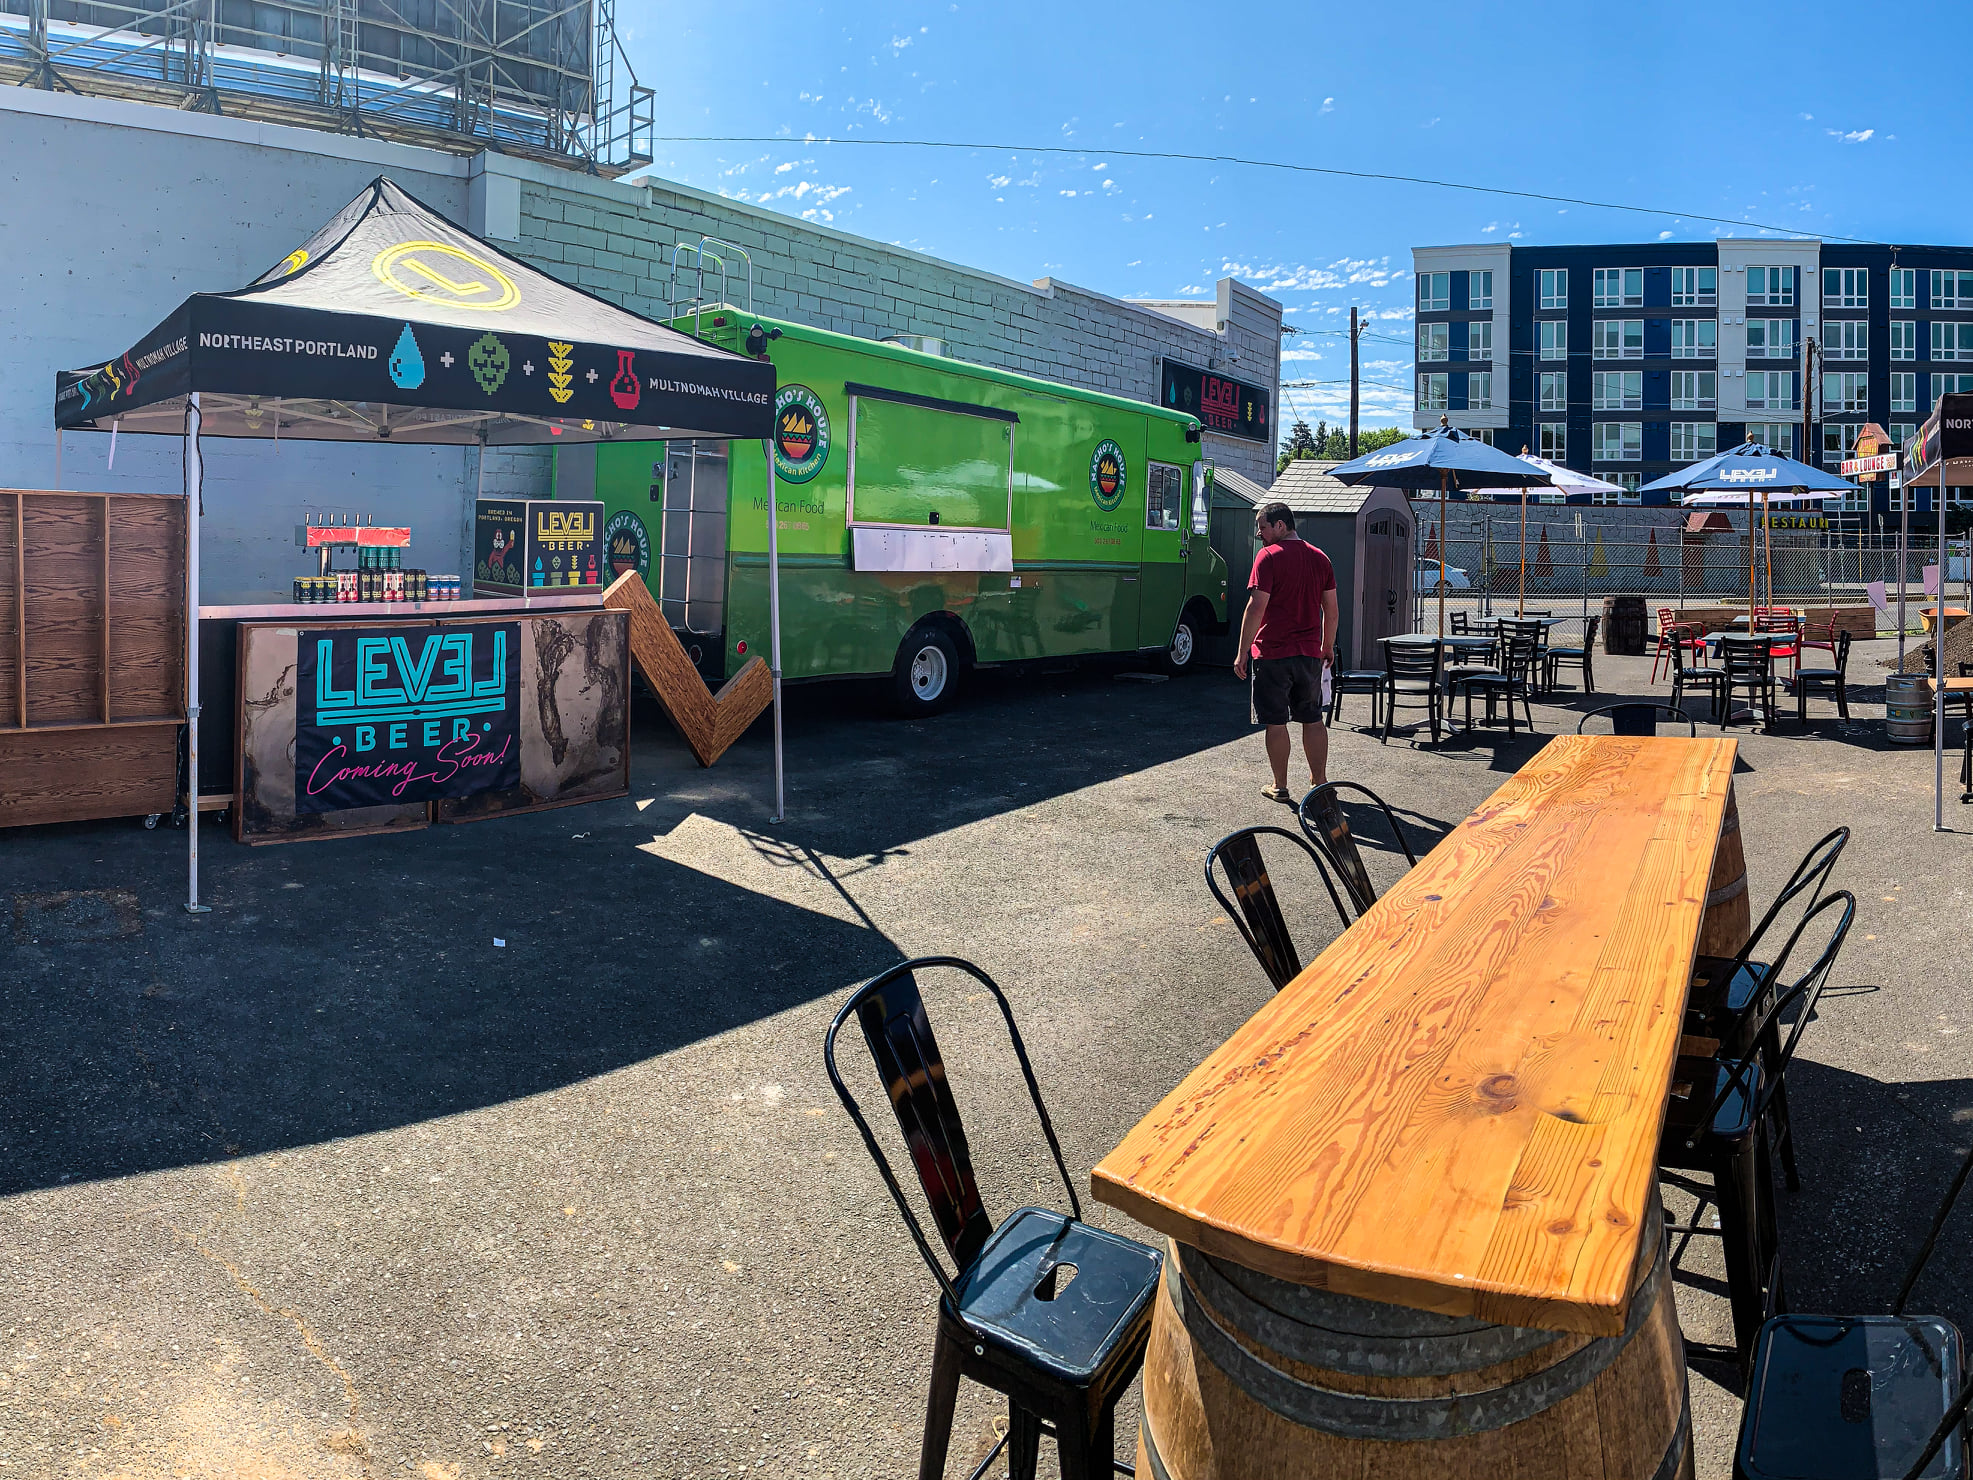 The Level 3 Pop-Up will take place each week from Friday - Sunday at the future home of Level 3 at 1447 NE Sandy Blvd in Portland. (image courtesy of Level Beer)